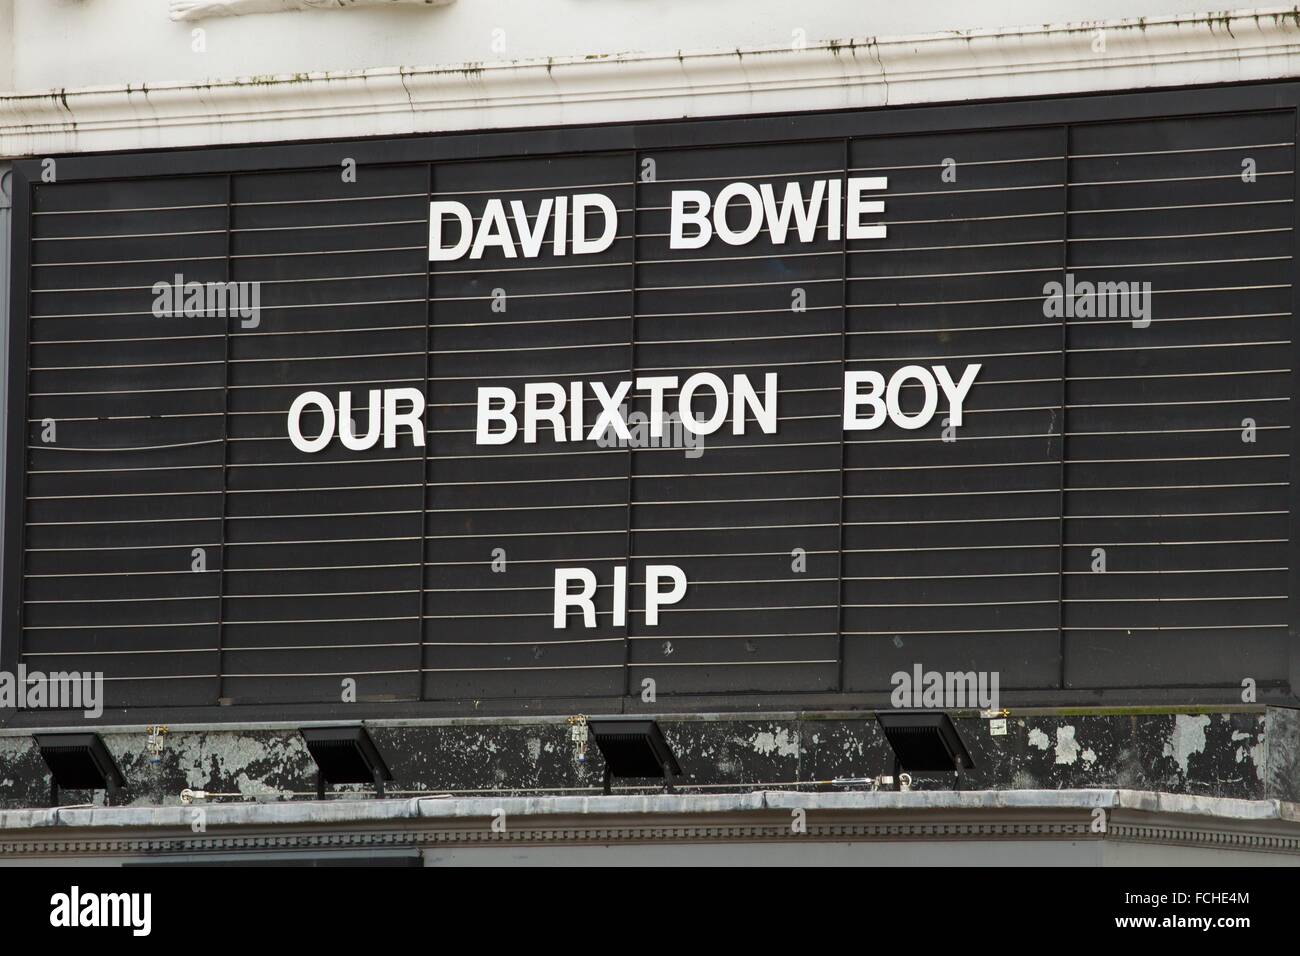 The Ritzy Cinema in Brixton pays tribute to local hero David Bowie with their film showings display. Stock Photo